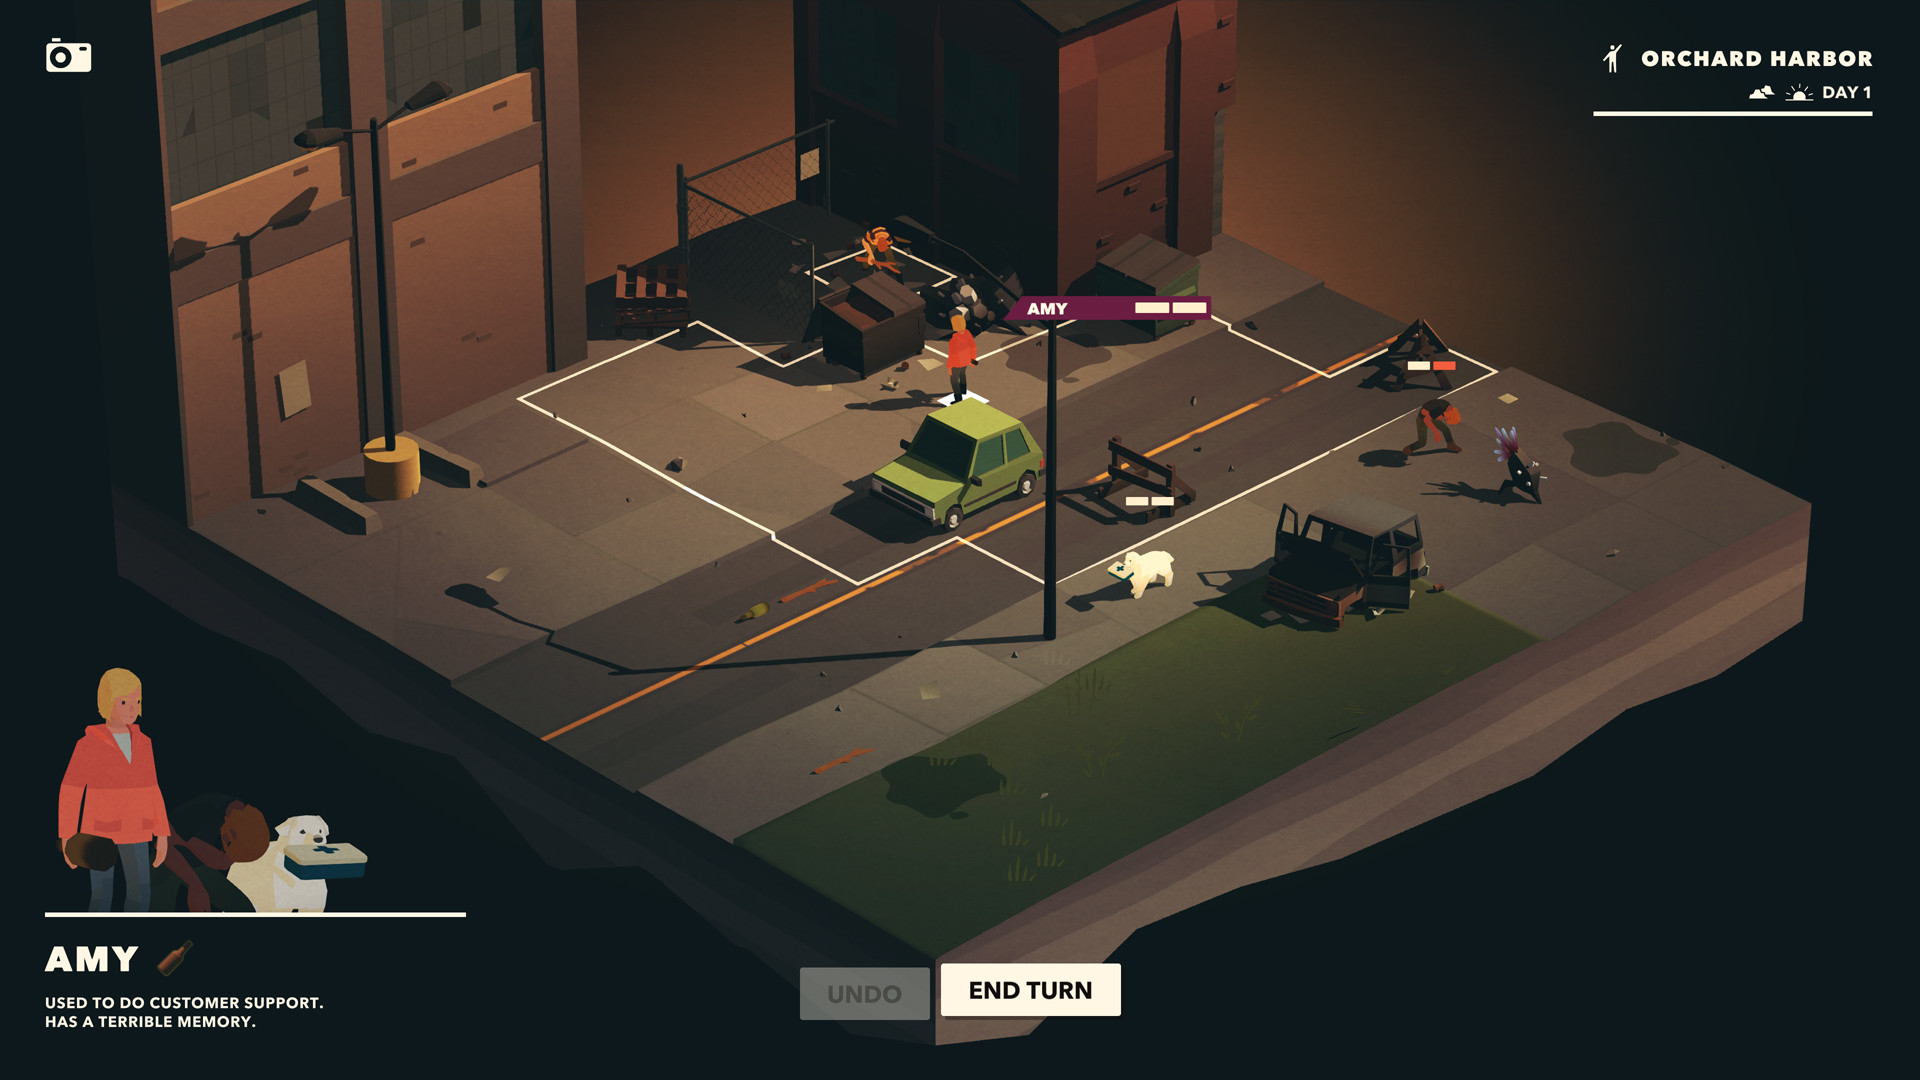 Overland review